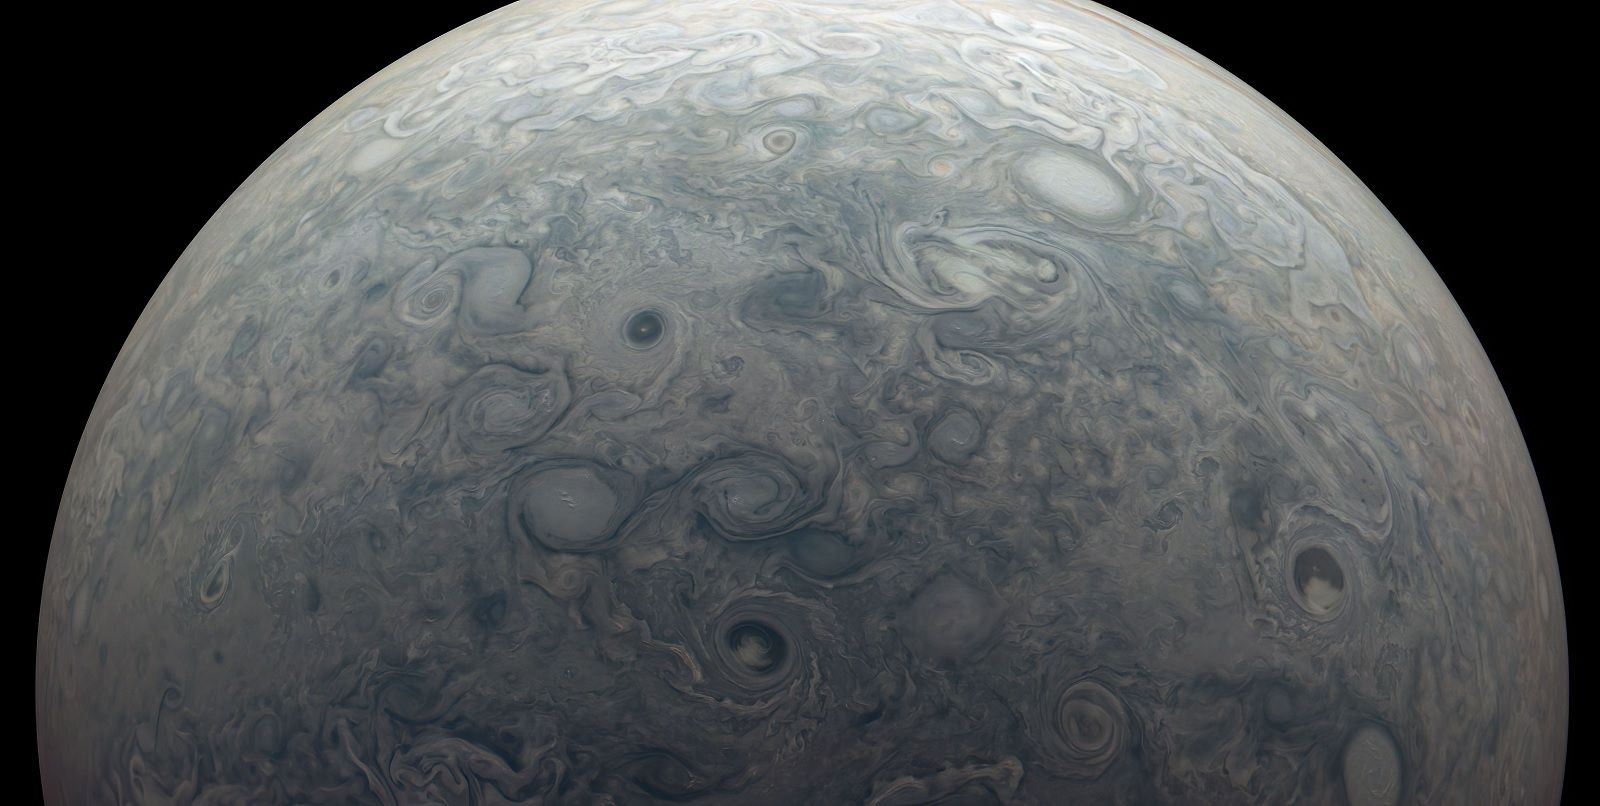 NASA's Juno spacecraft has captured some seriously impressive images of Jupiter and more photo 1